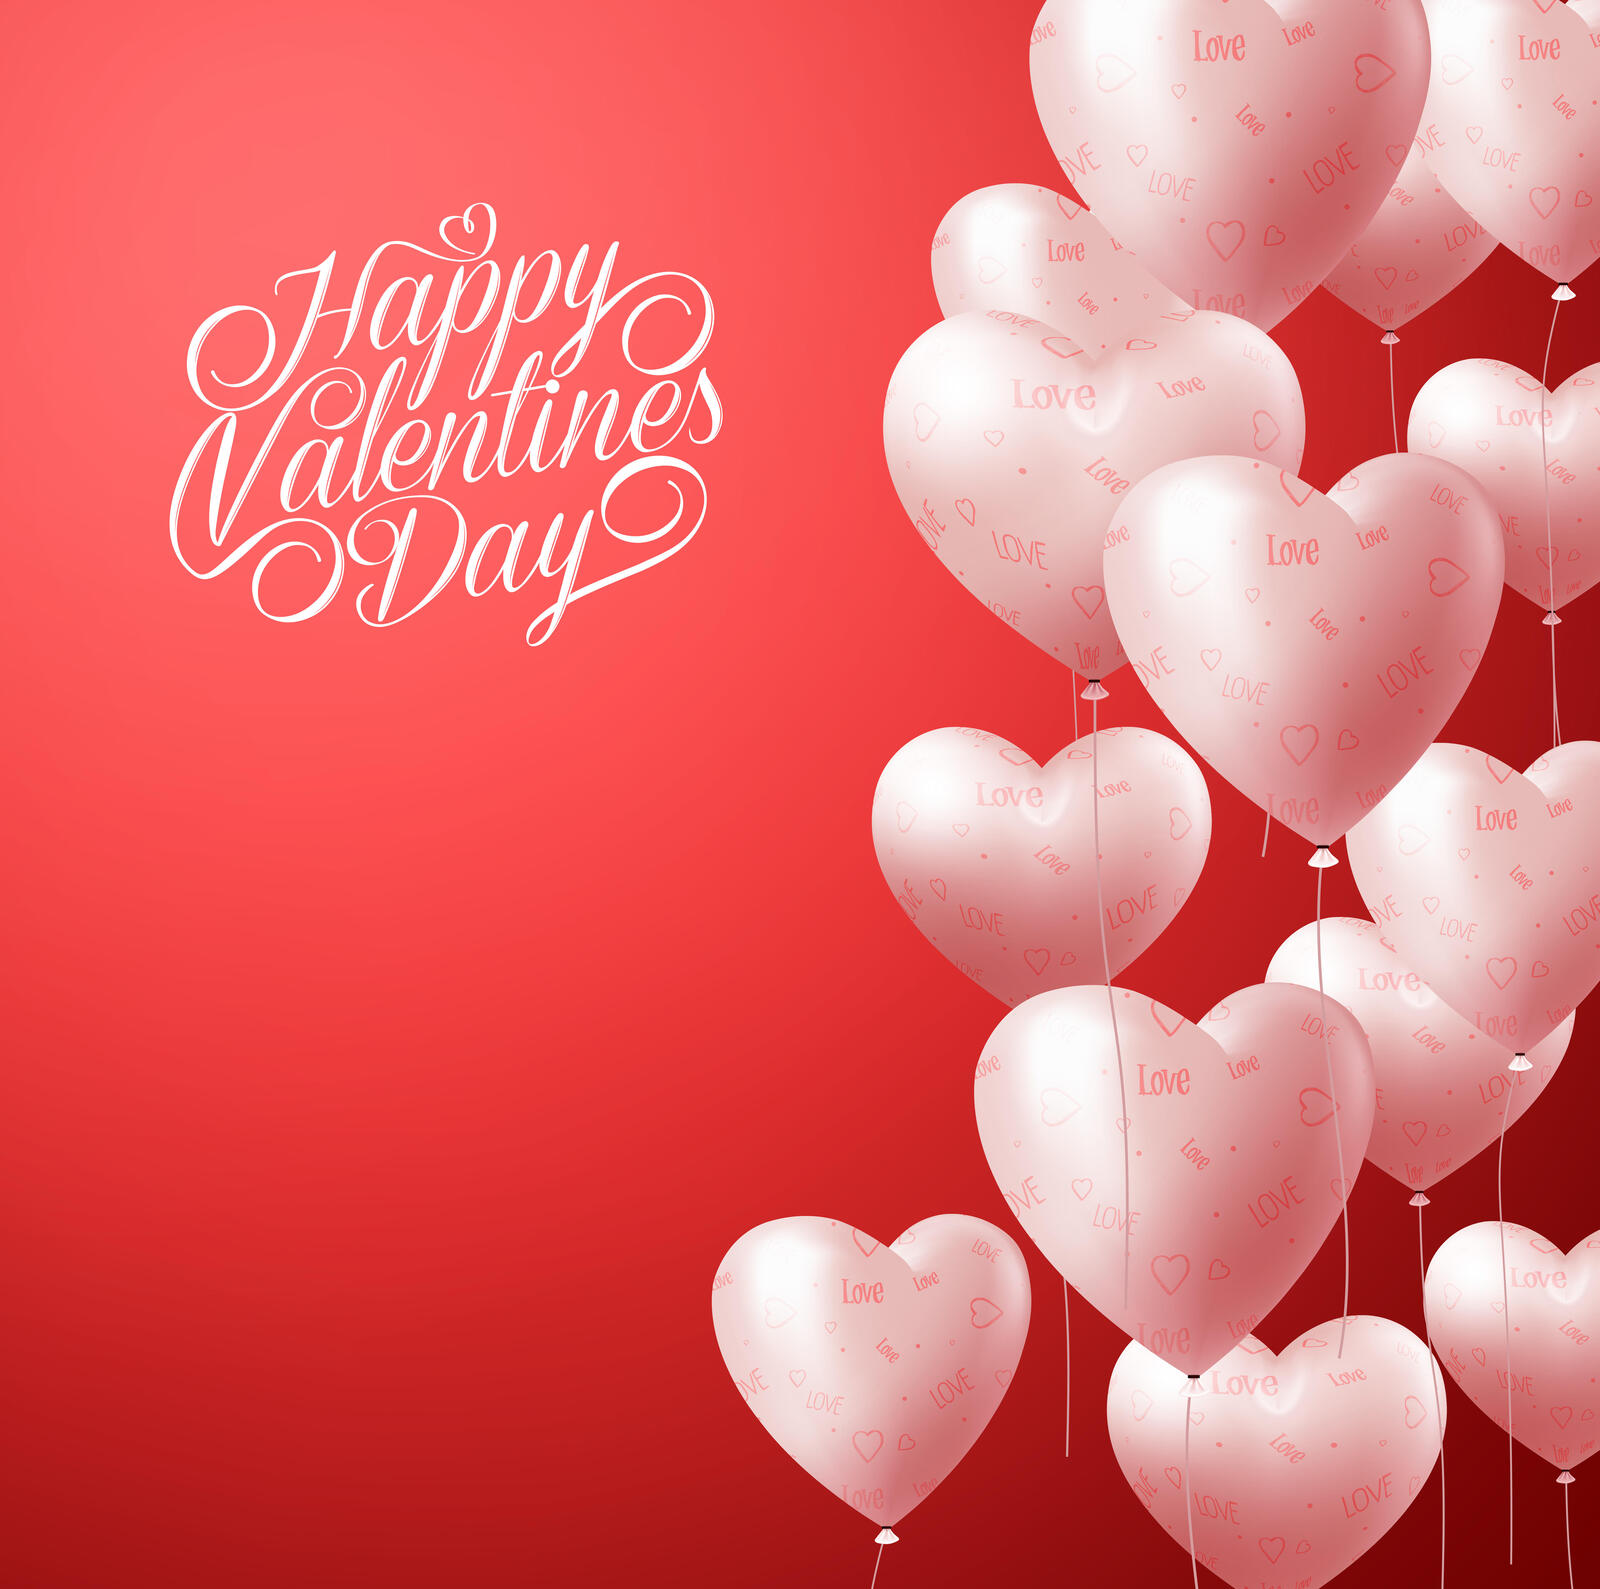 Wallpapers romantic hearts Valentine holidays on the desktop